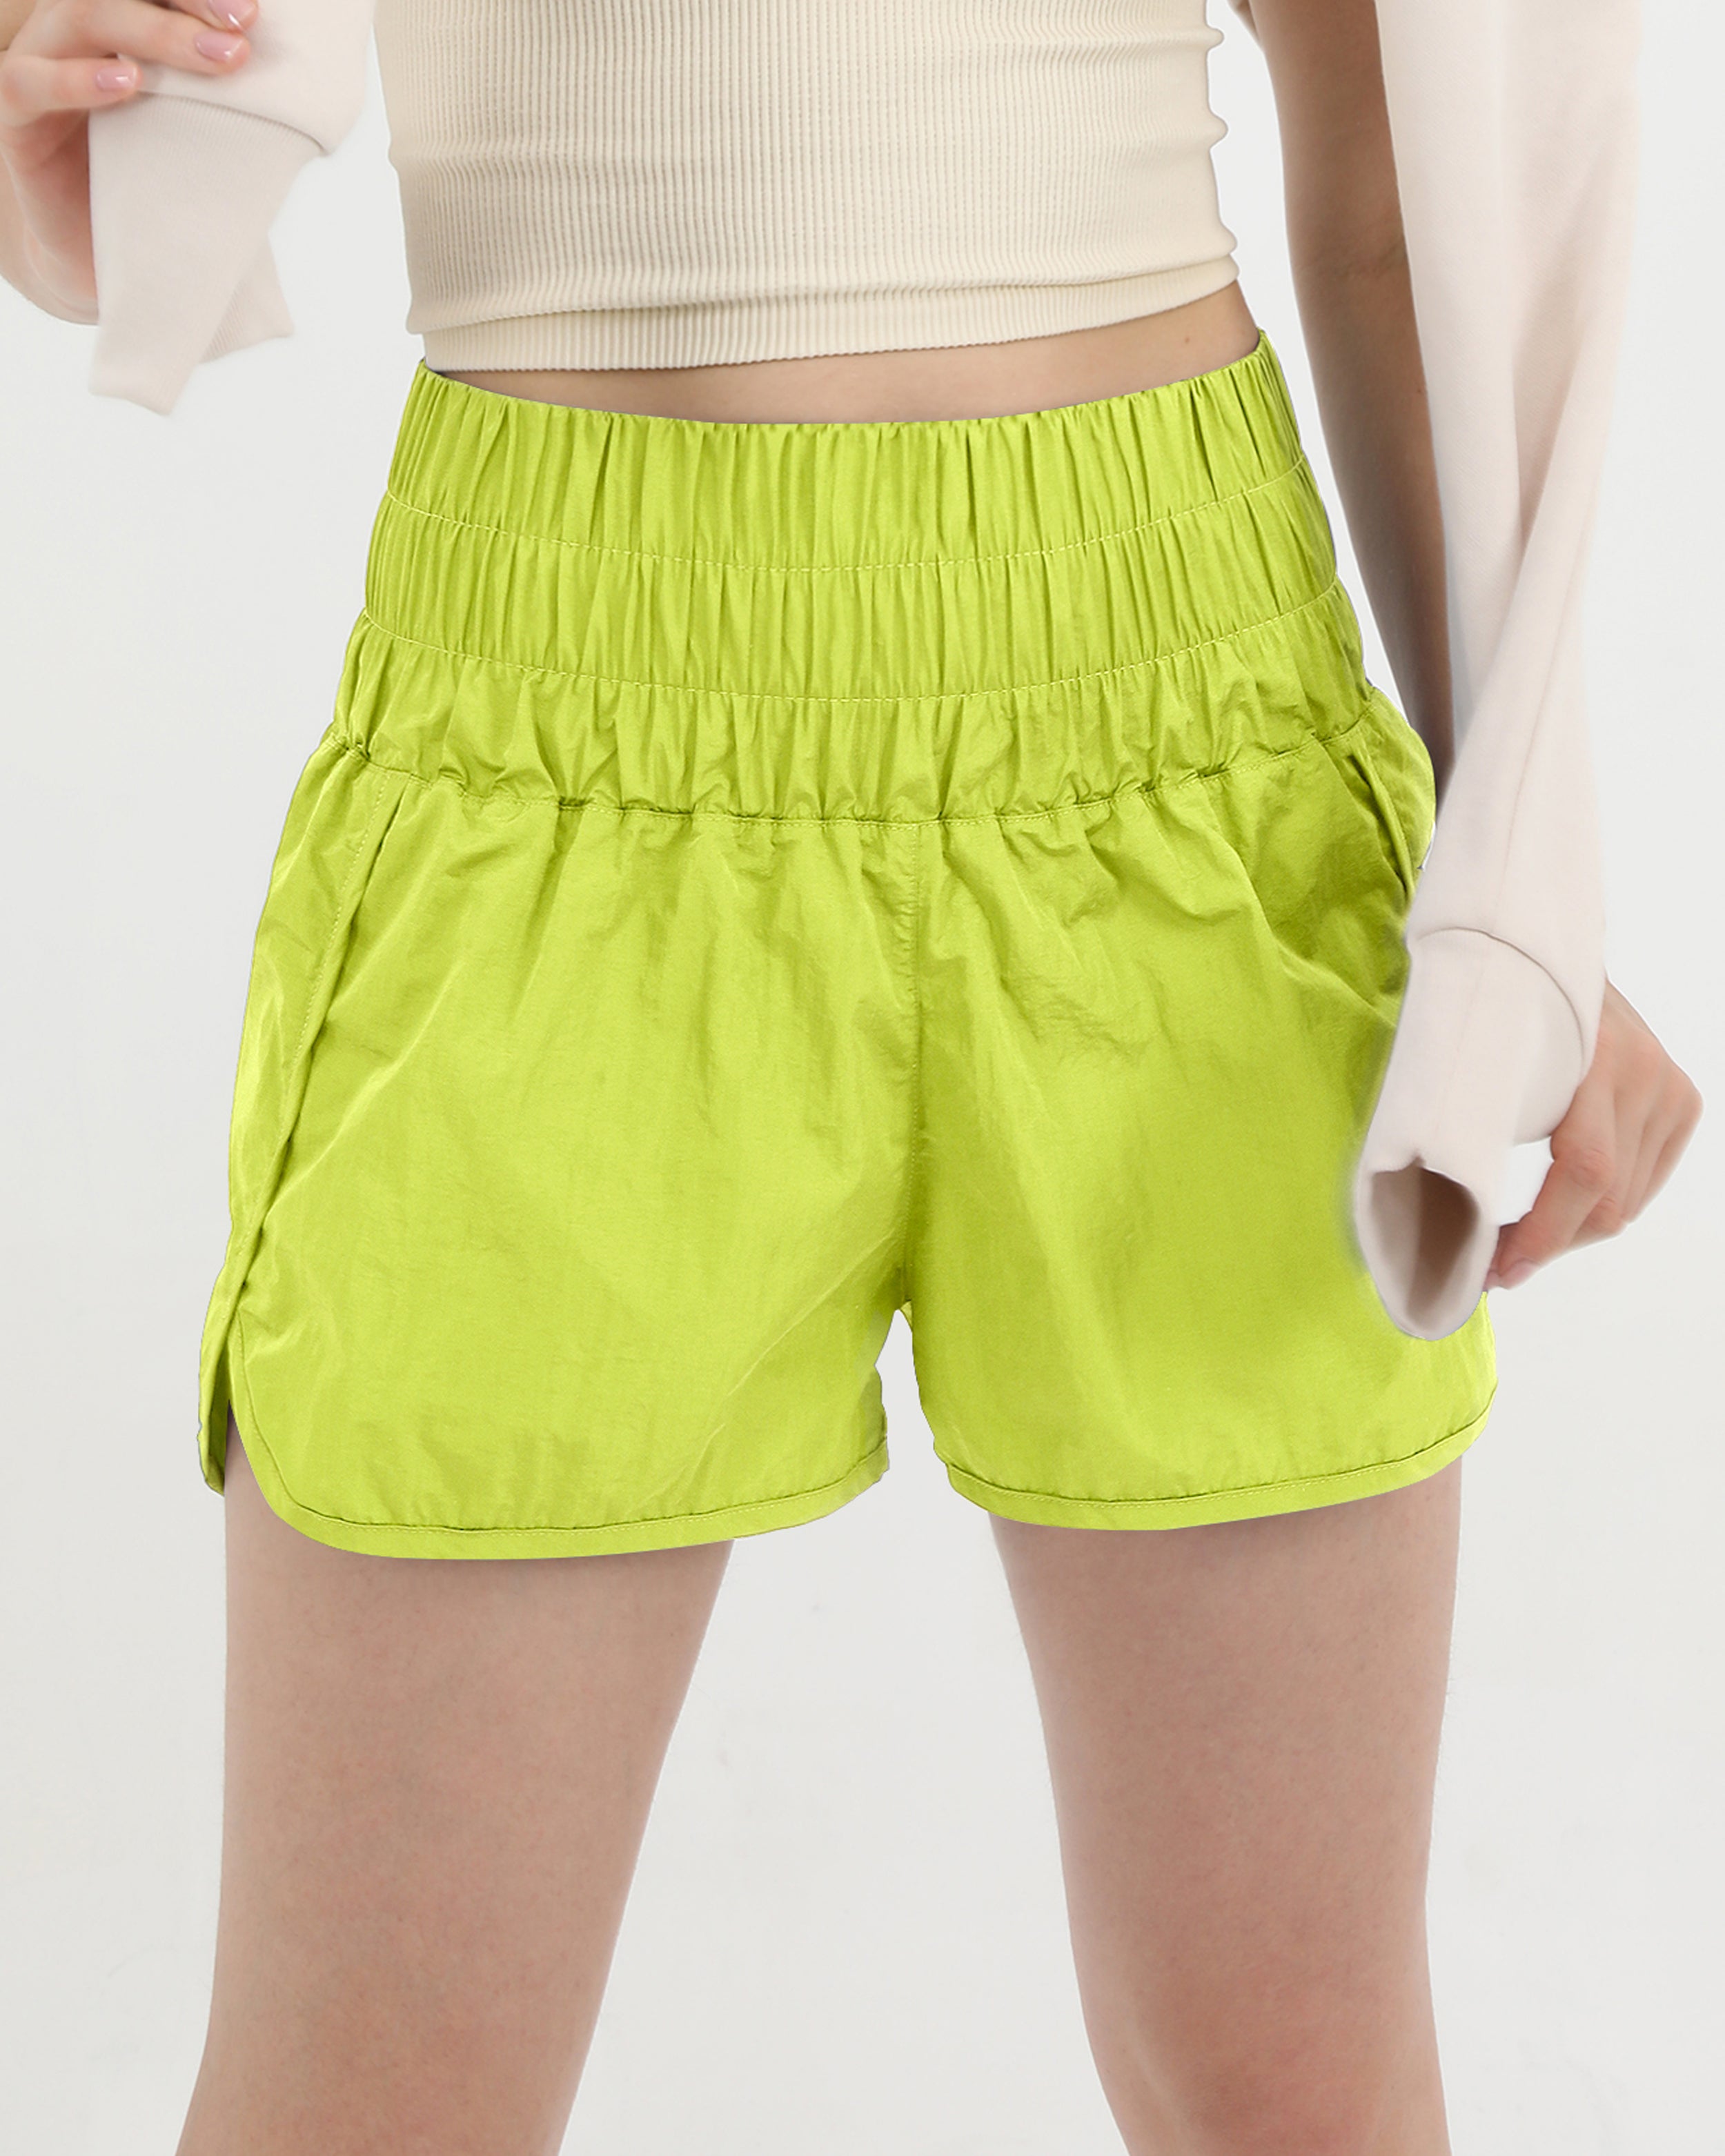 Go to Athletic Shorts-No Liner Pineapple - ododos